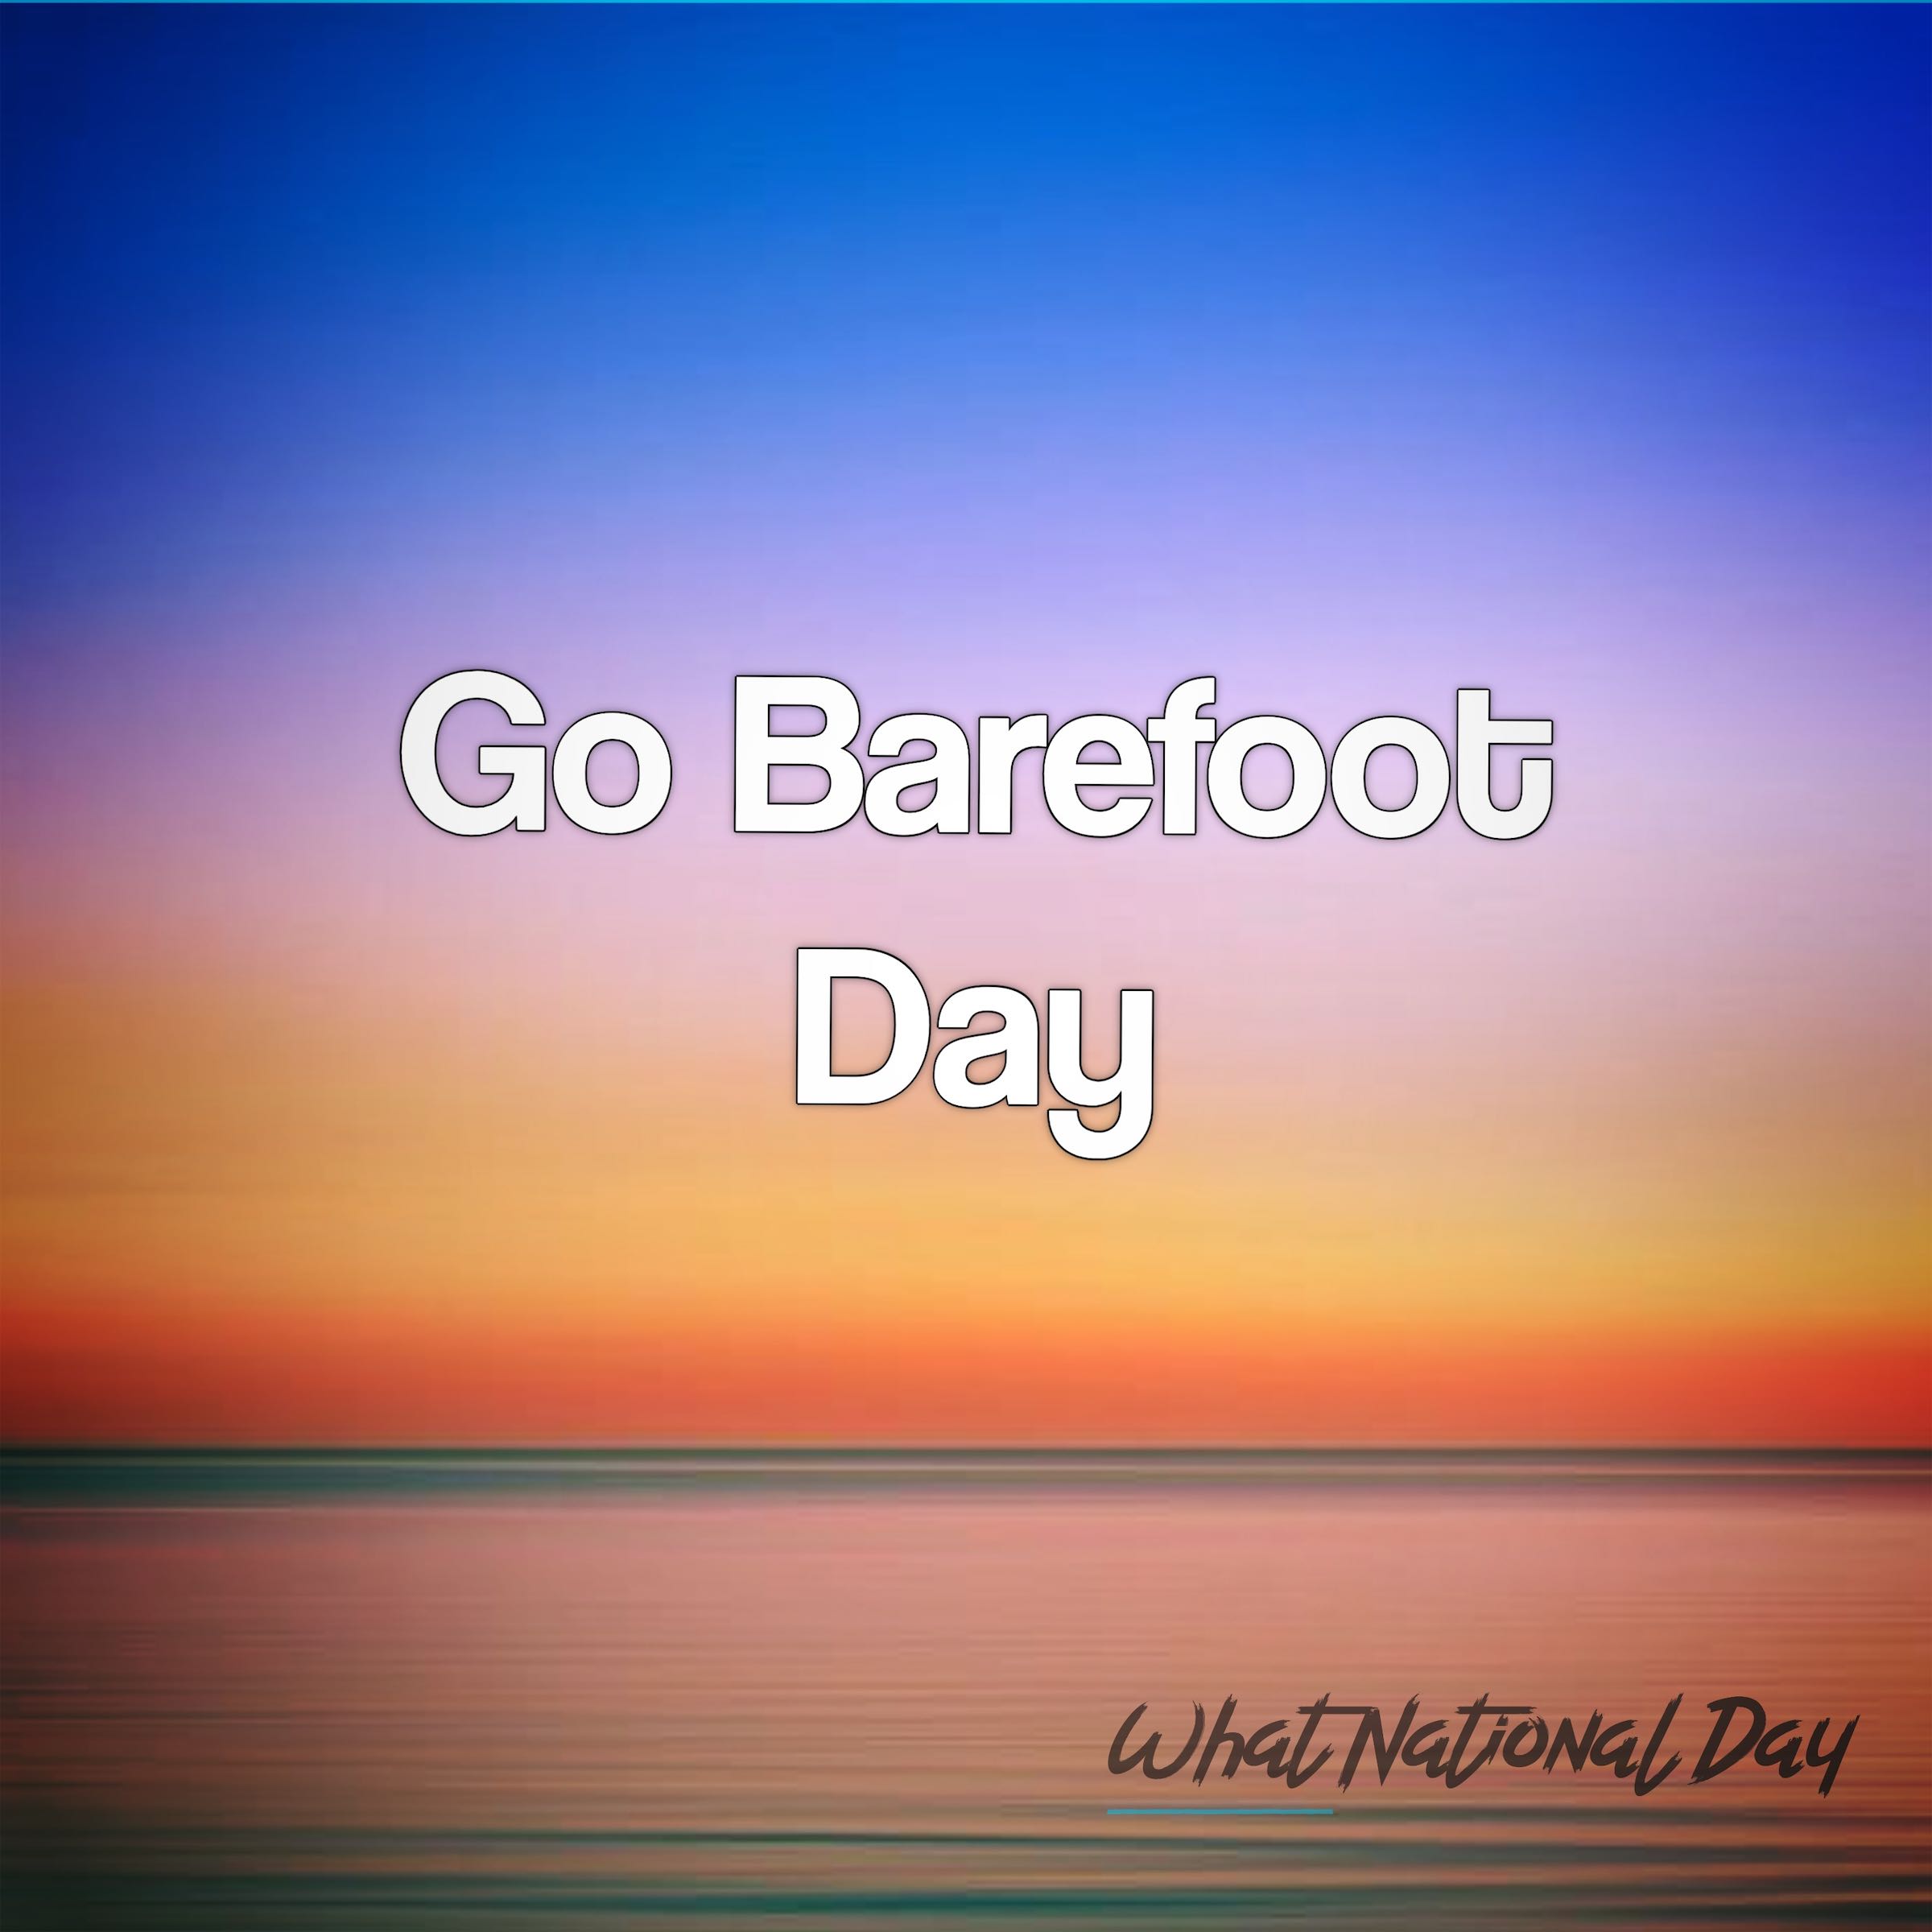 Go Barefoot Day